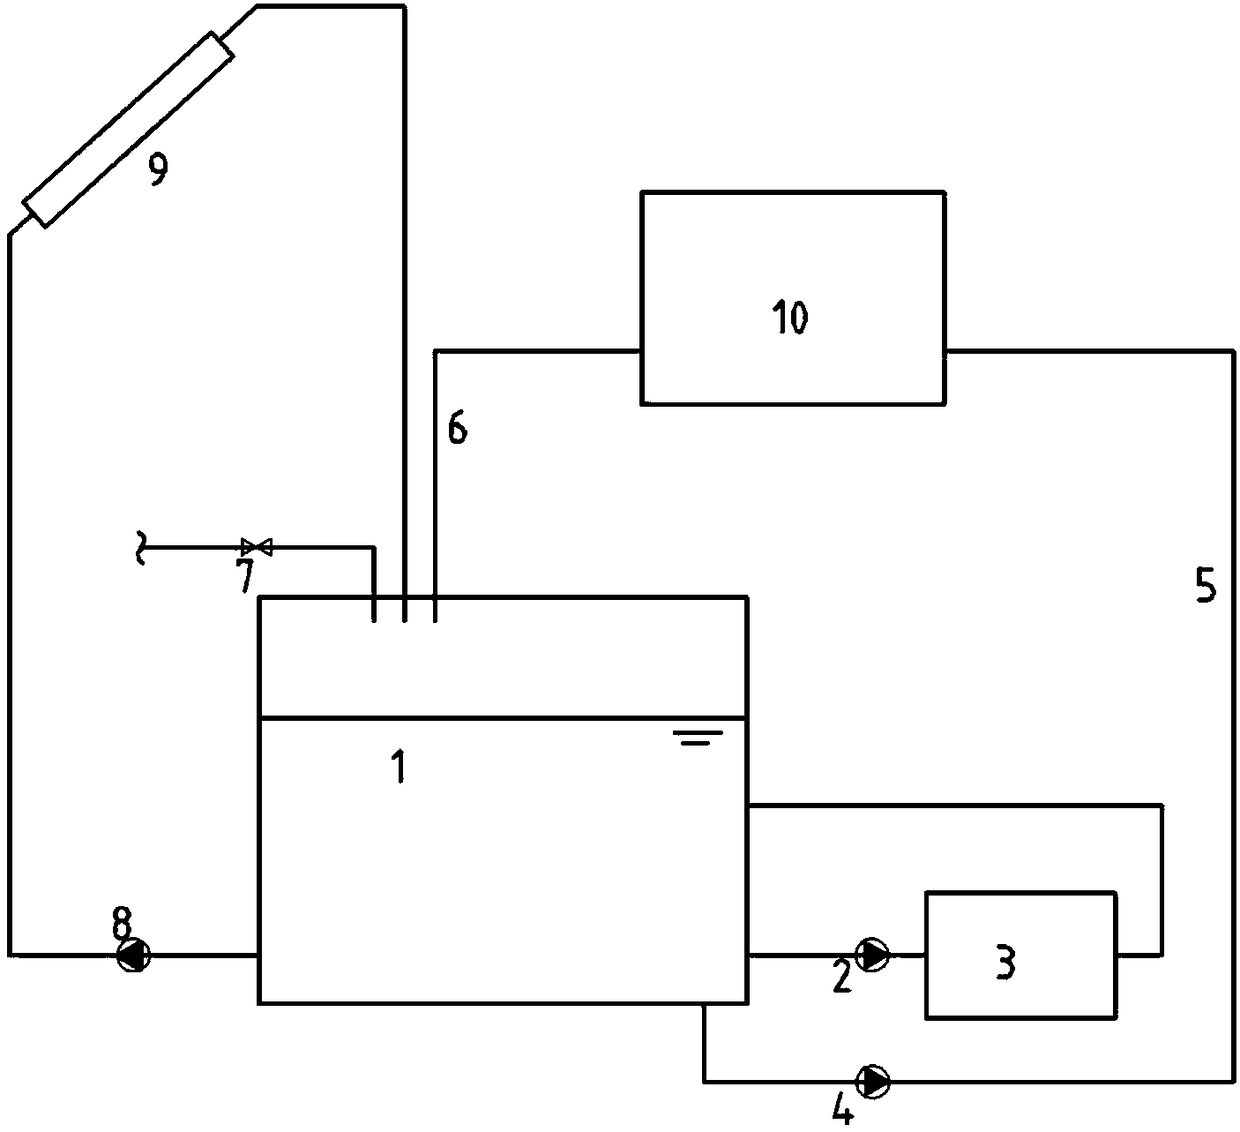 A control method for a double-tank solar water heating system with varying minimum water levels